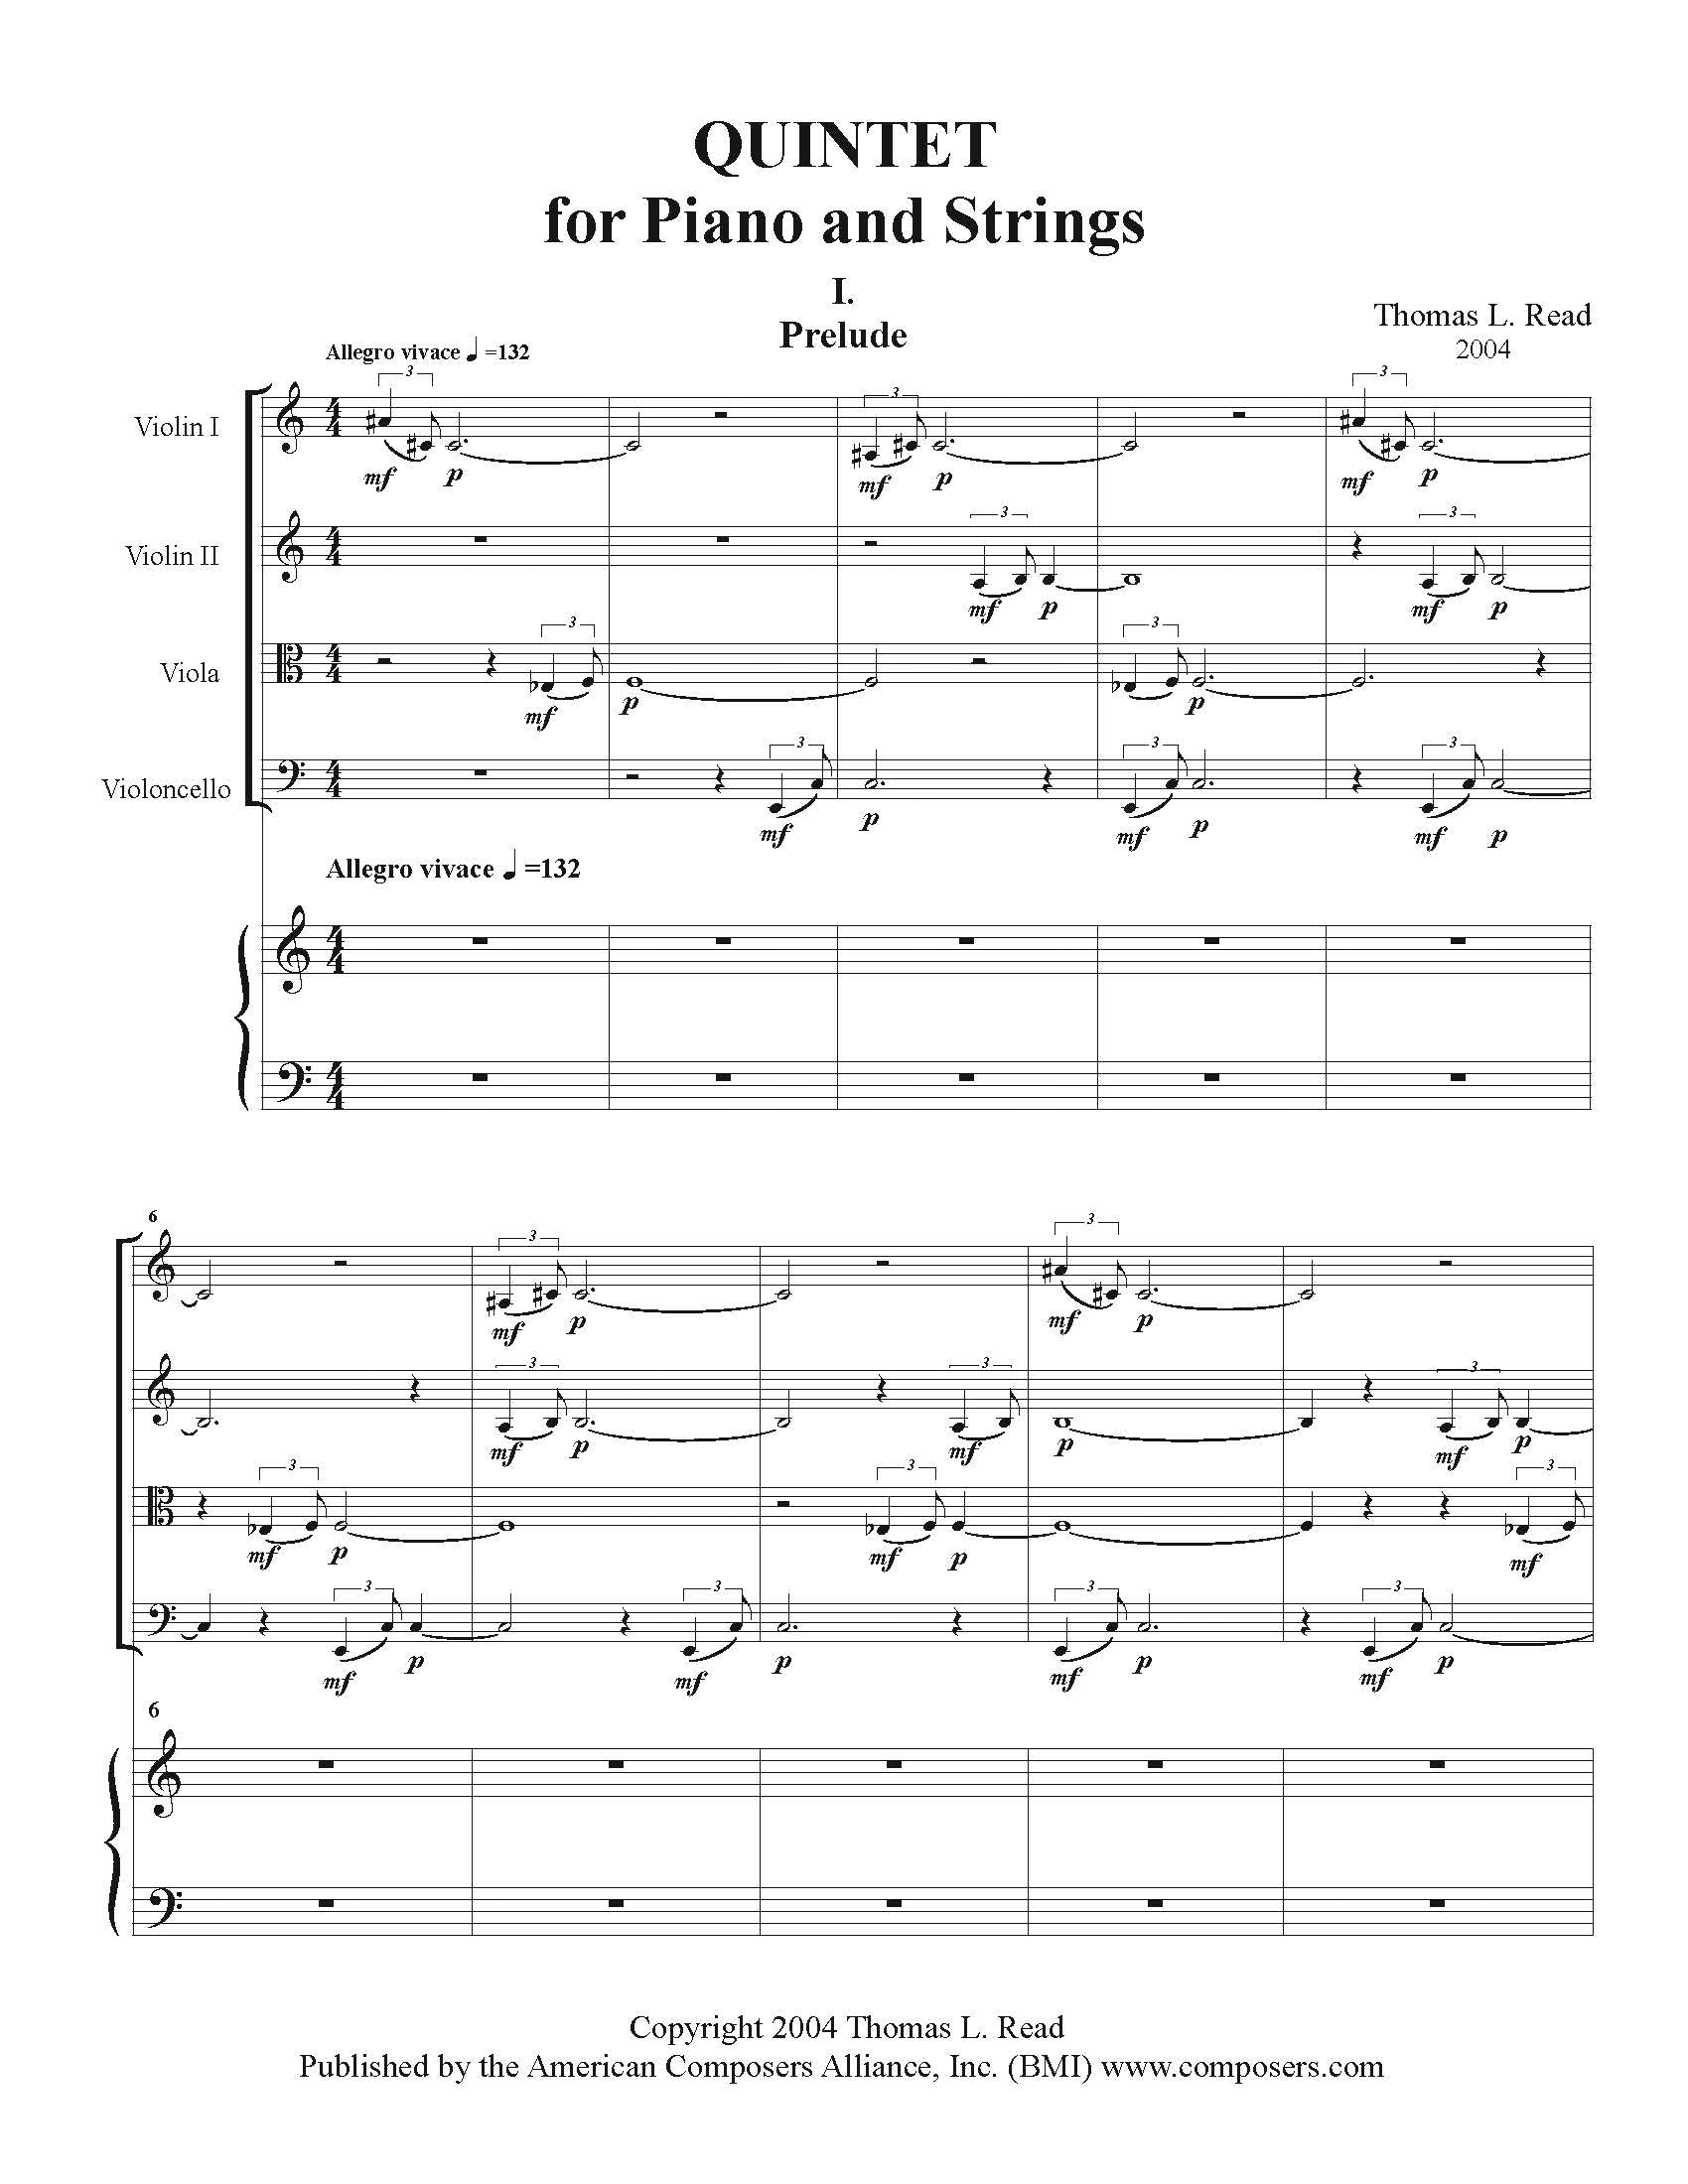 Read: Quintet for Piano and Strings